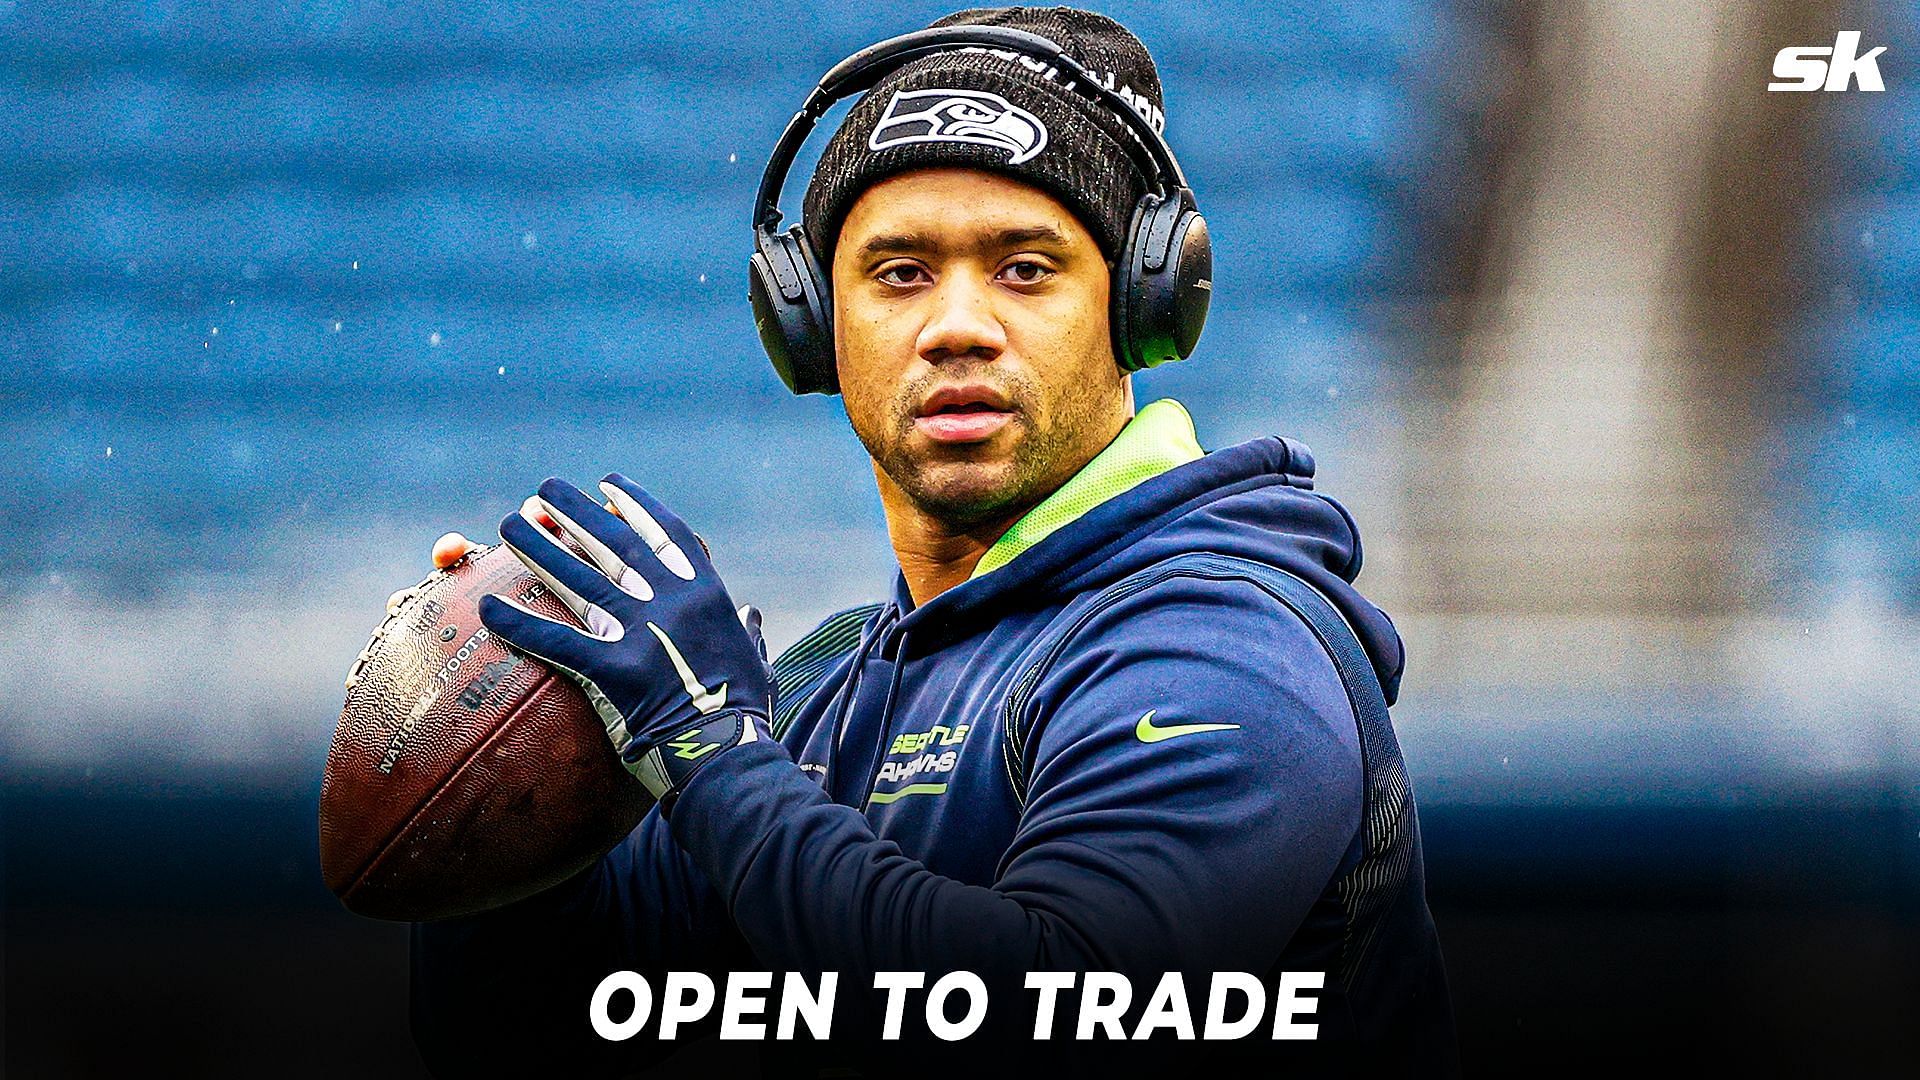 Apparently, the Seattle Seahawks are open to trading Russell Wilson